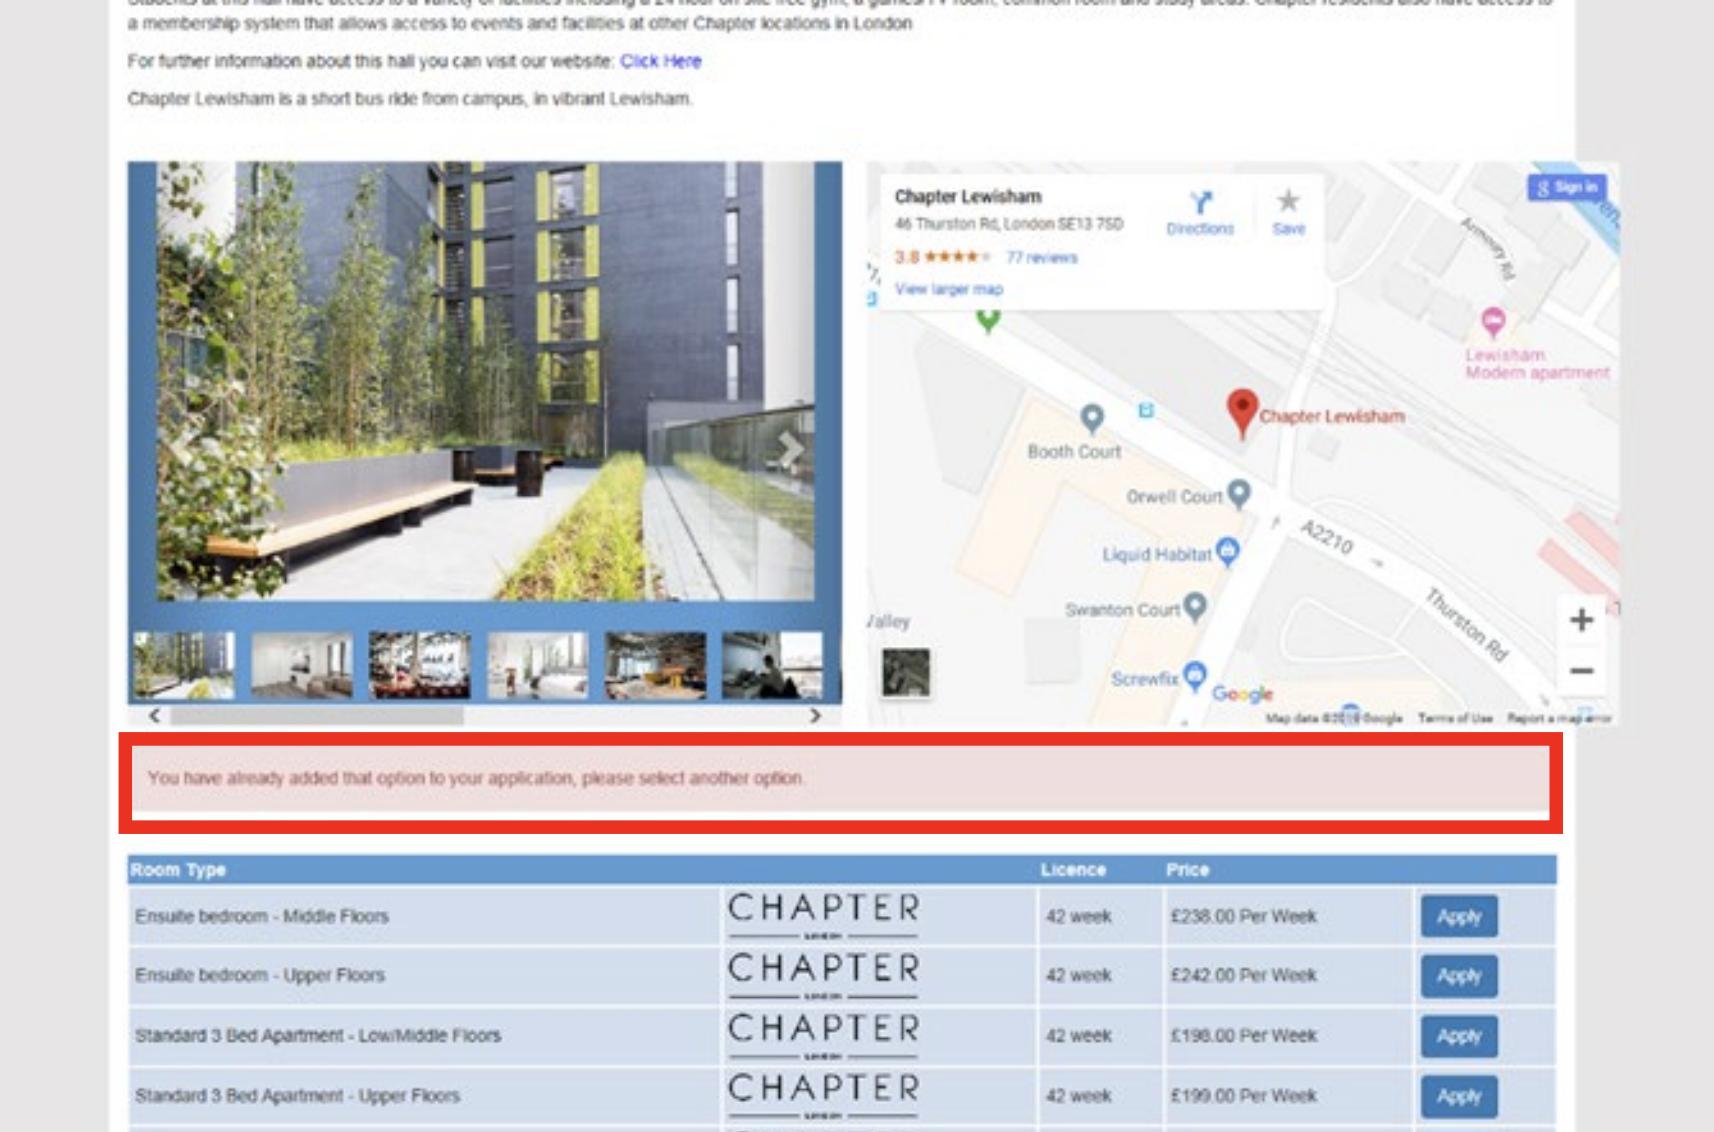 Screenshot of room choices screen in online accommodation application portal